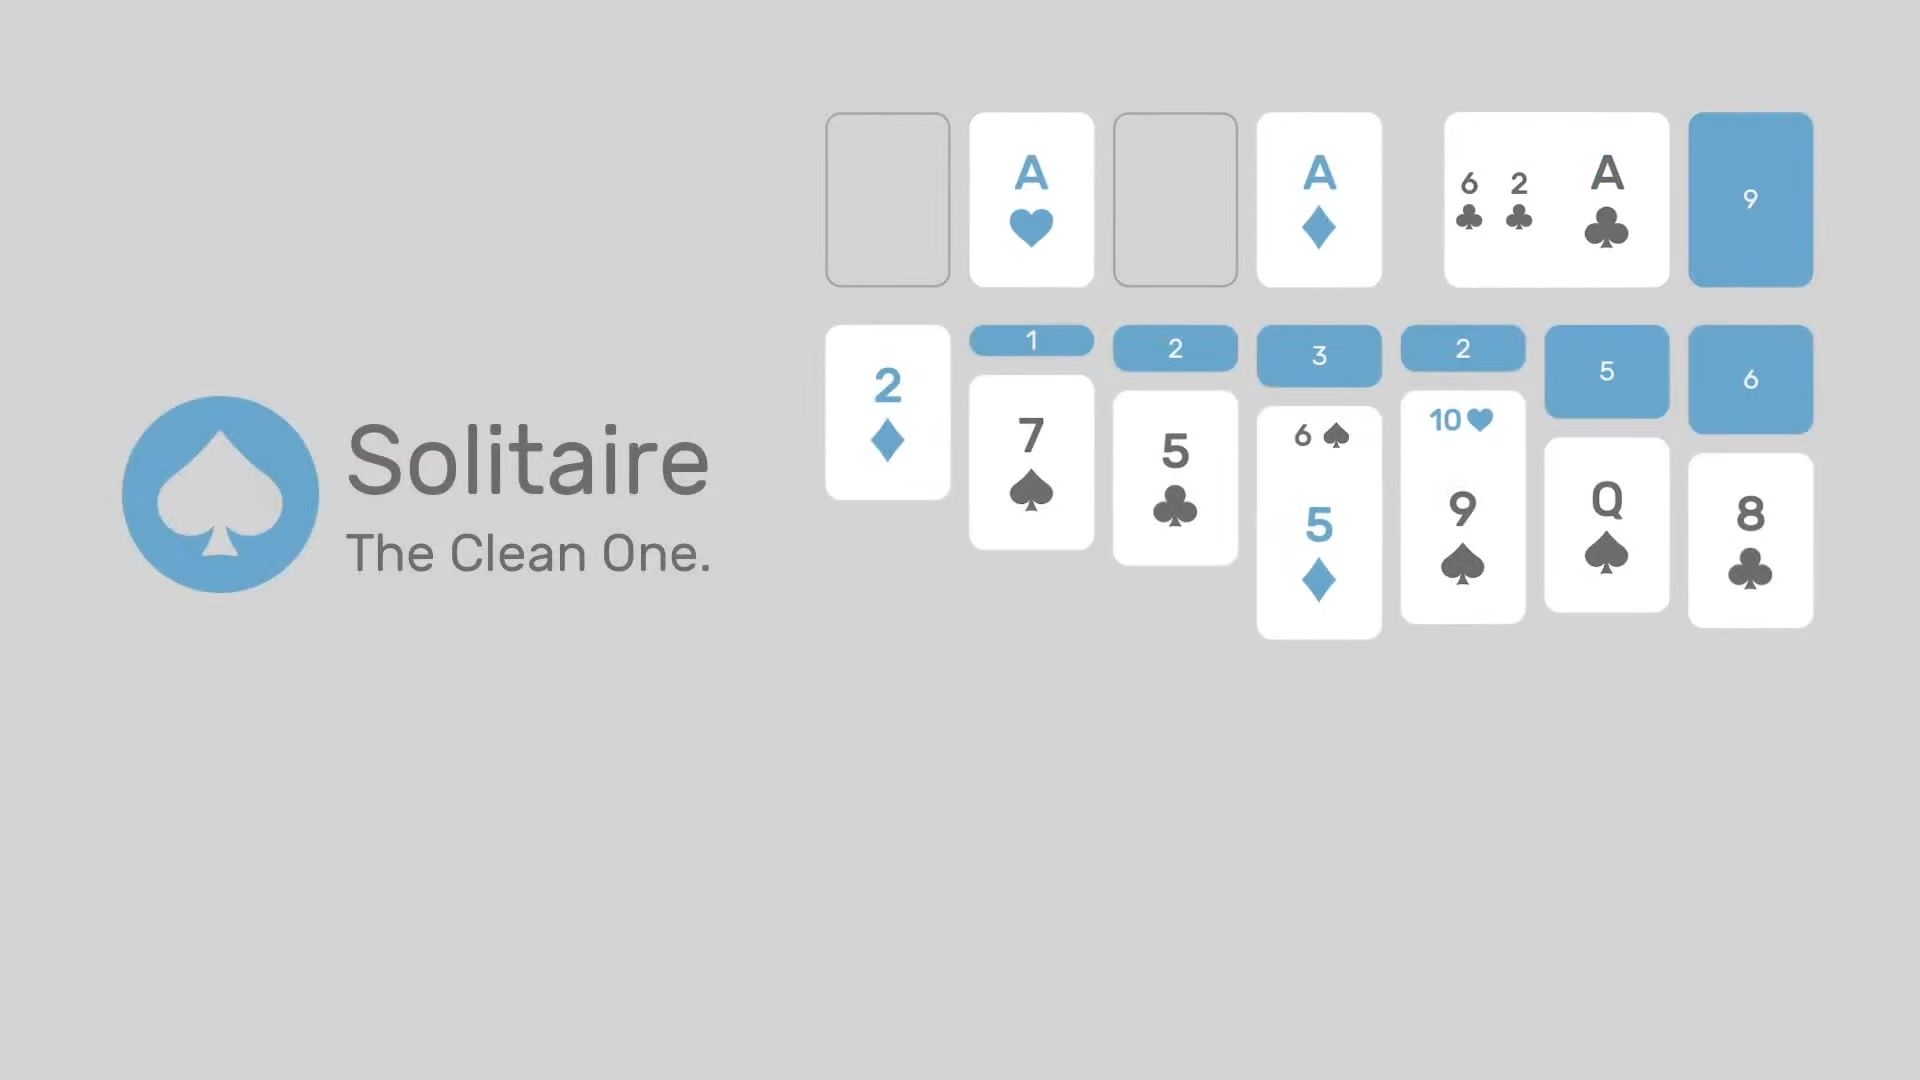 Solitaire - The Clean One - Android game screenshots.